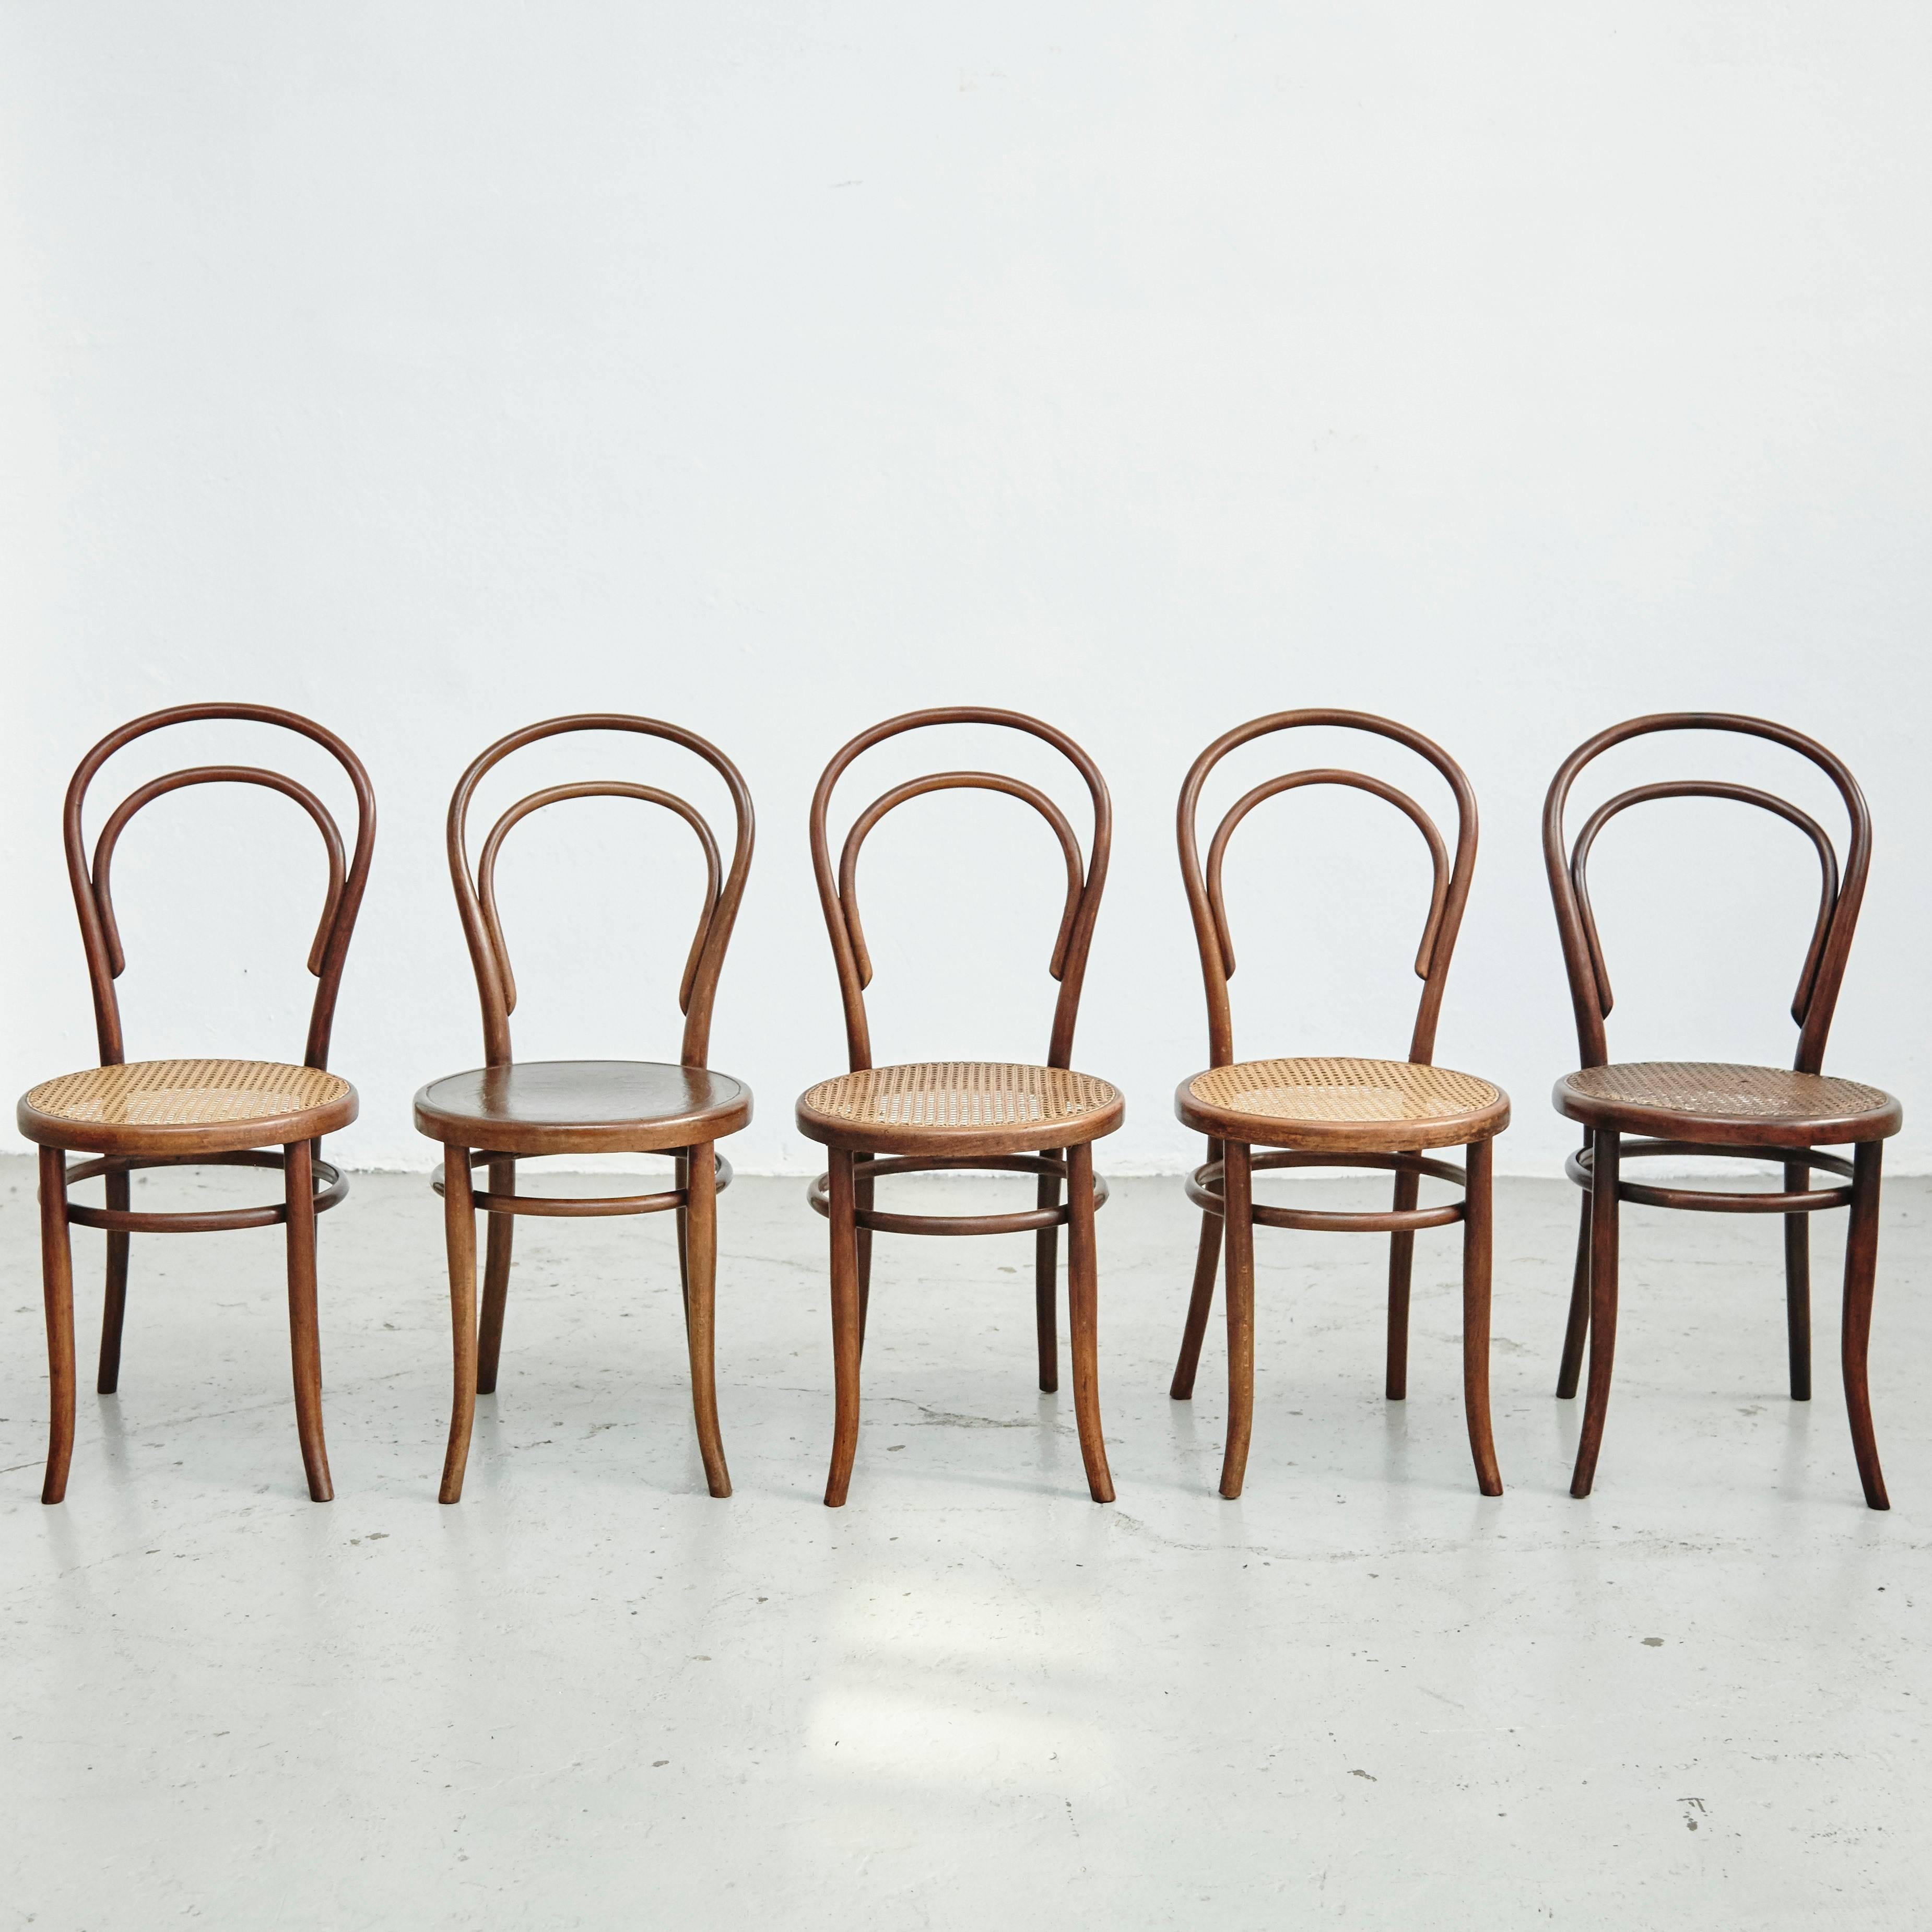 Set of ten bentwood chairs, circa 1900.
Pair of Thonet chairs, manufactured in France.
Set of four Fischel chairs, manufactured in Austria.
Pair of Kohn Ciars and unknown artist chairs, manufactured in Austria
bentwood and rattan.

In good